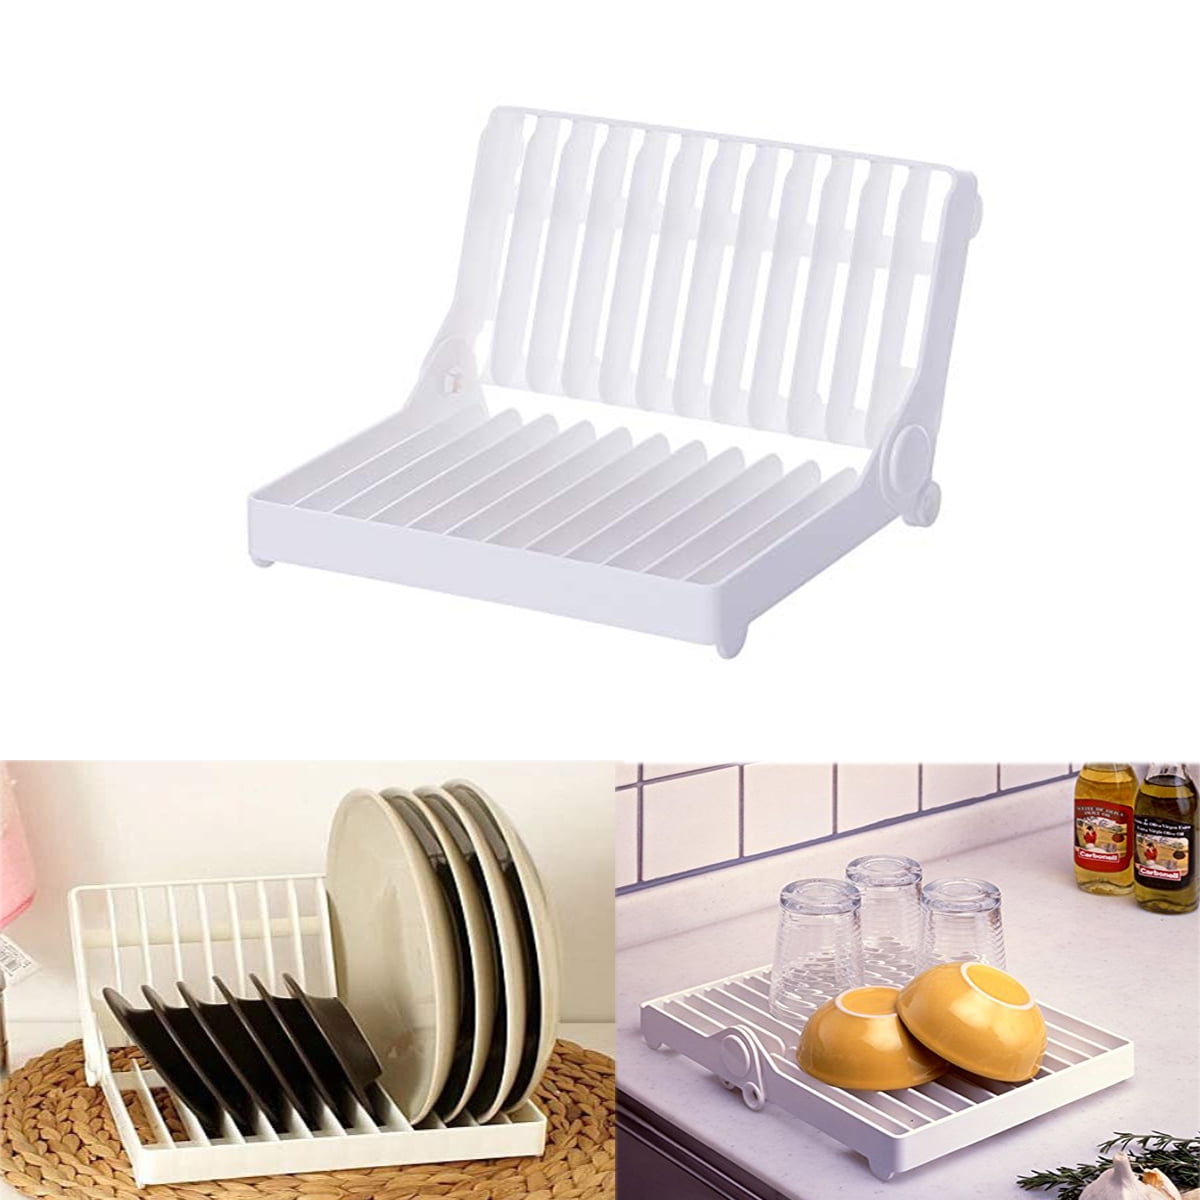 Gohope Hot Racks And Holders Kitchen Foldable Dish Rack Stand